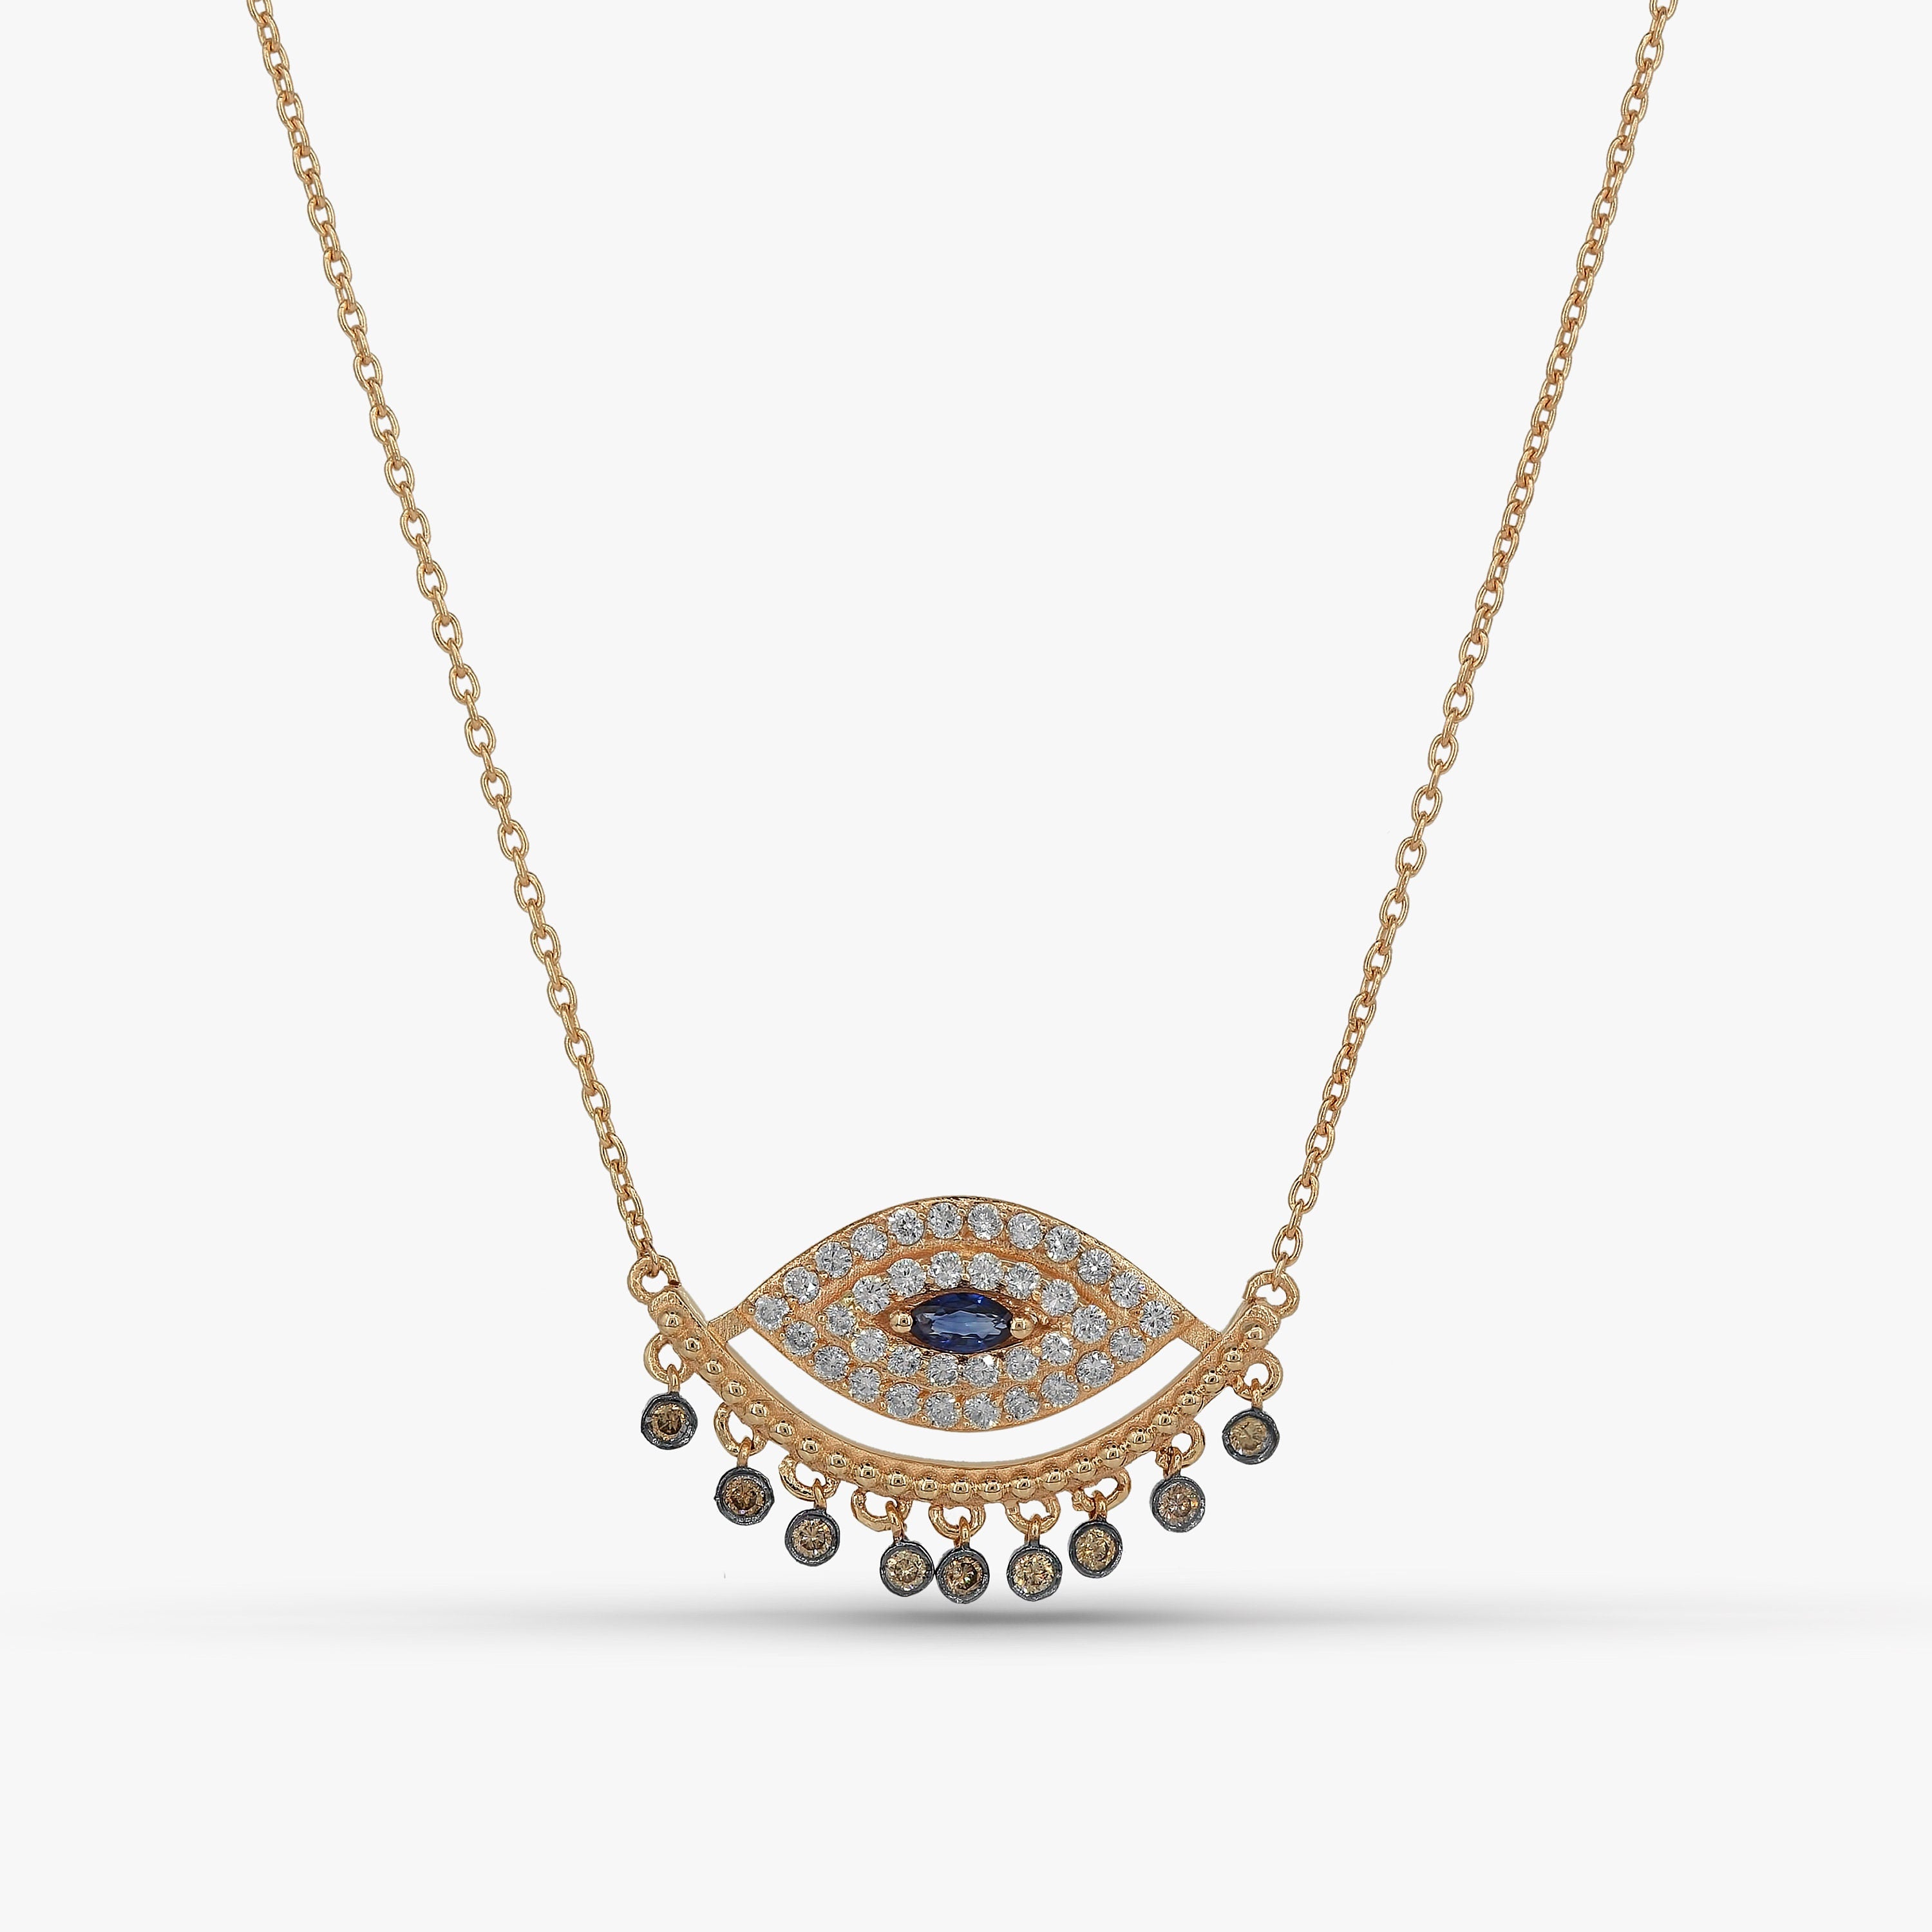 Greek Evil Eye Necklace Available in 14K and 18K Gold